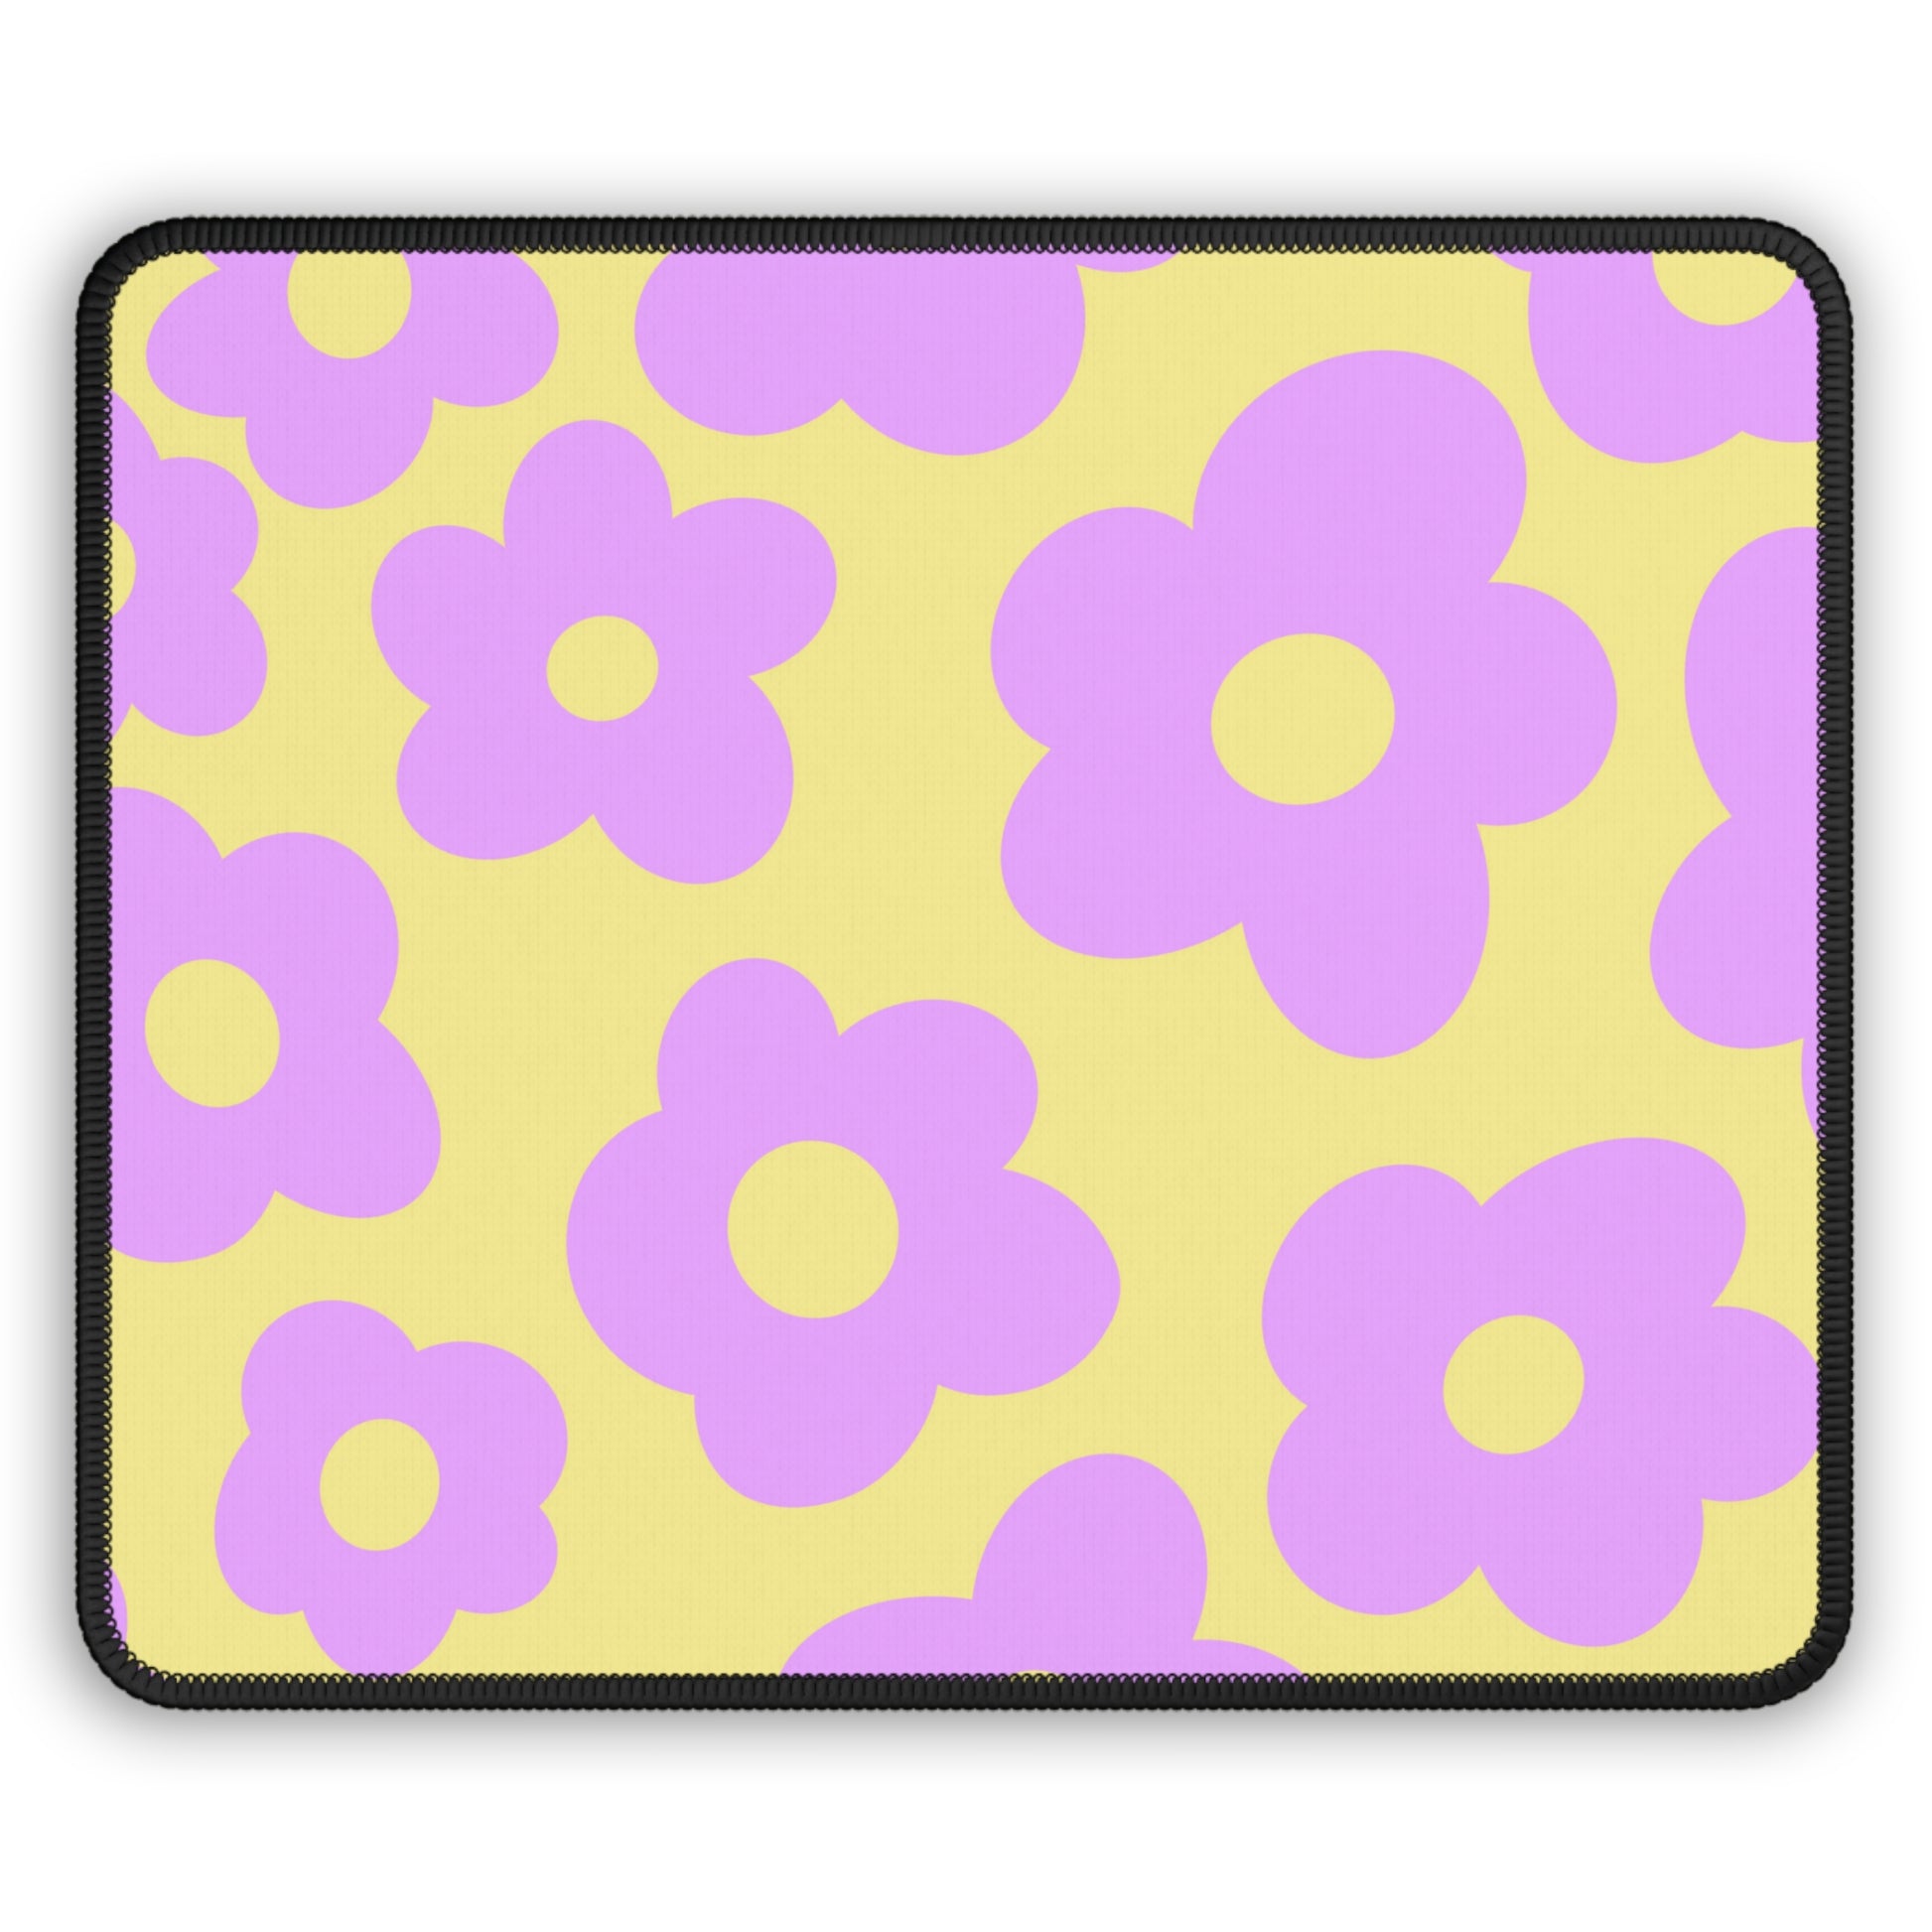 A gaming mouse pad with purple flowers on a yellow background.